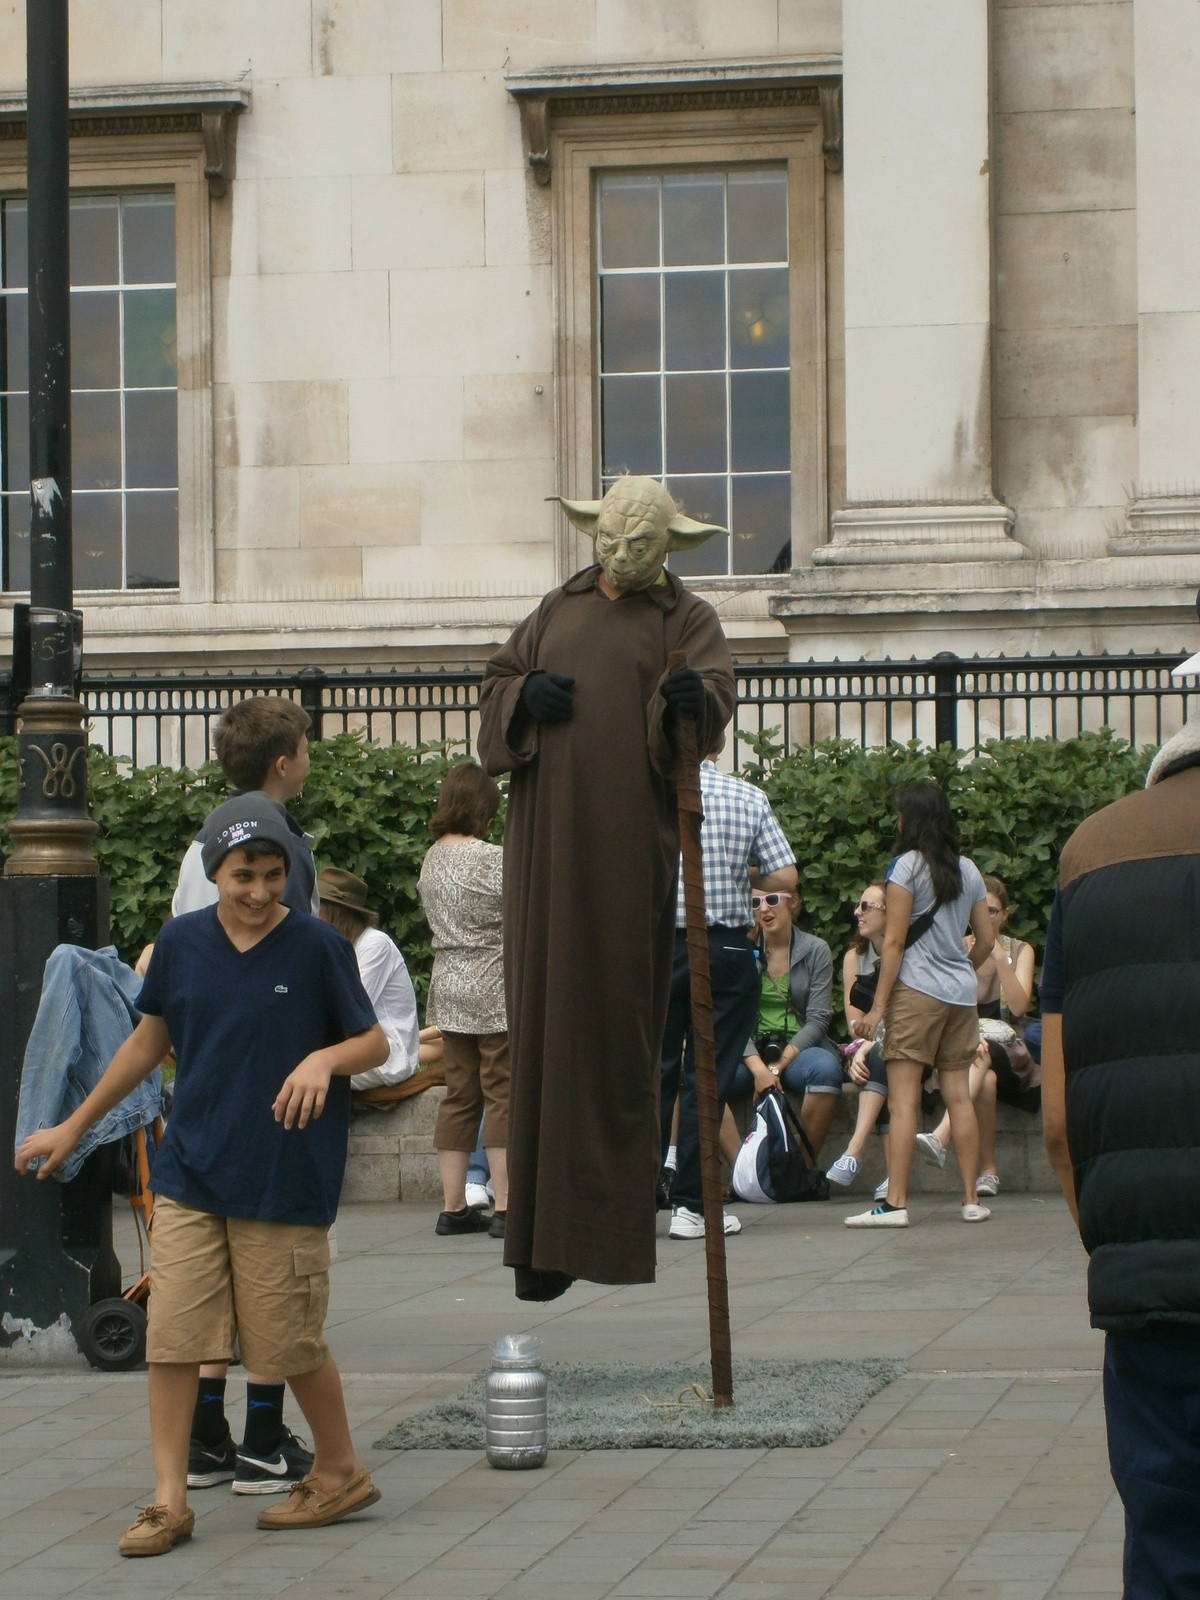 D3 Yoda on the Square